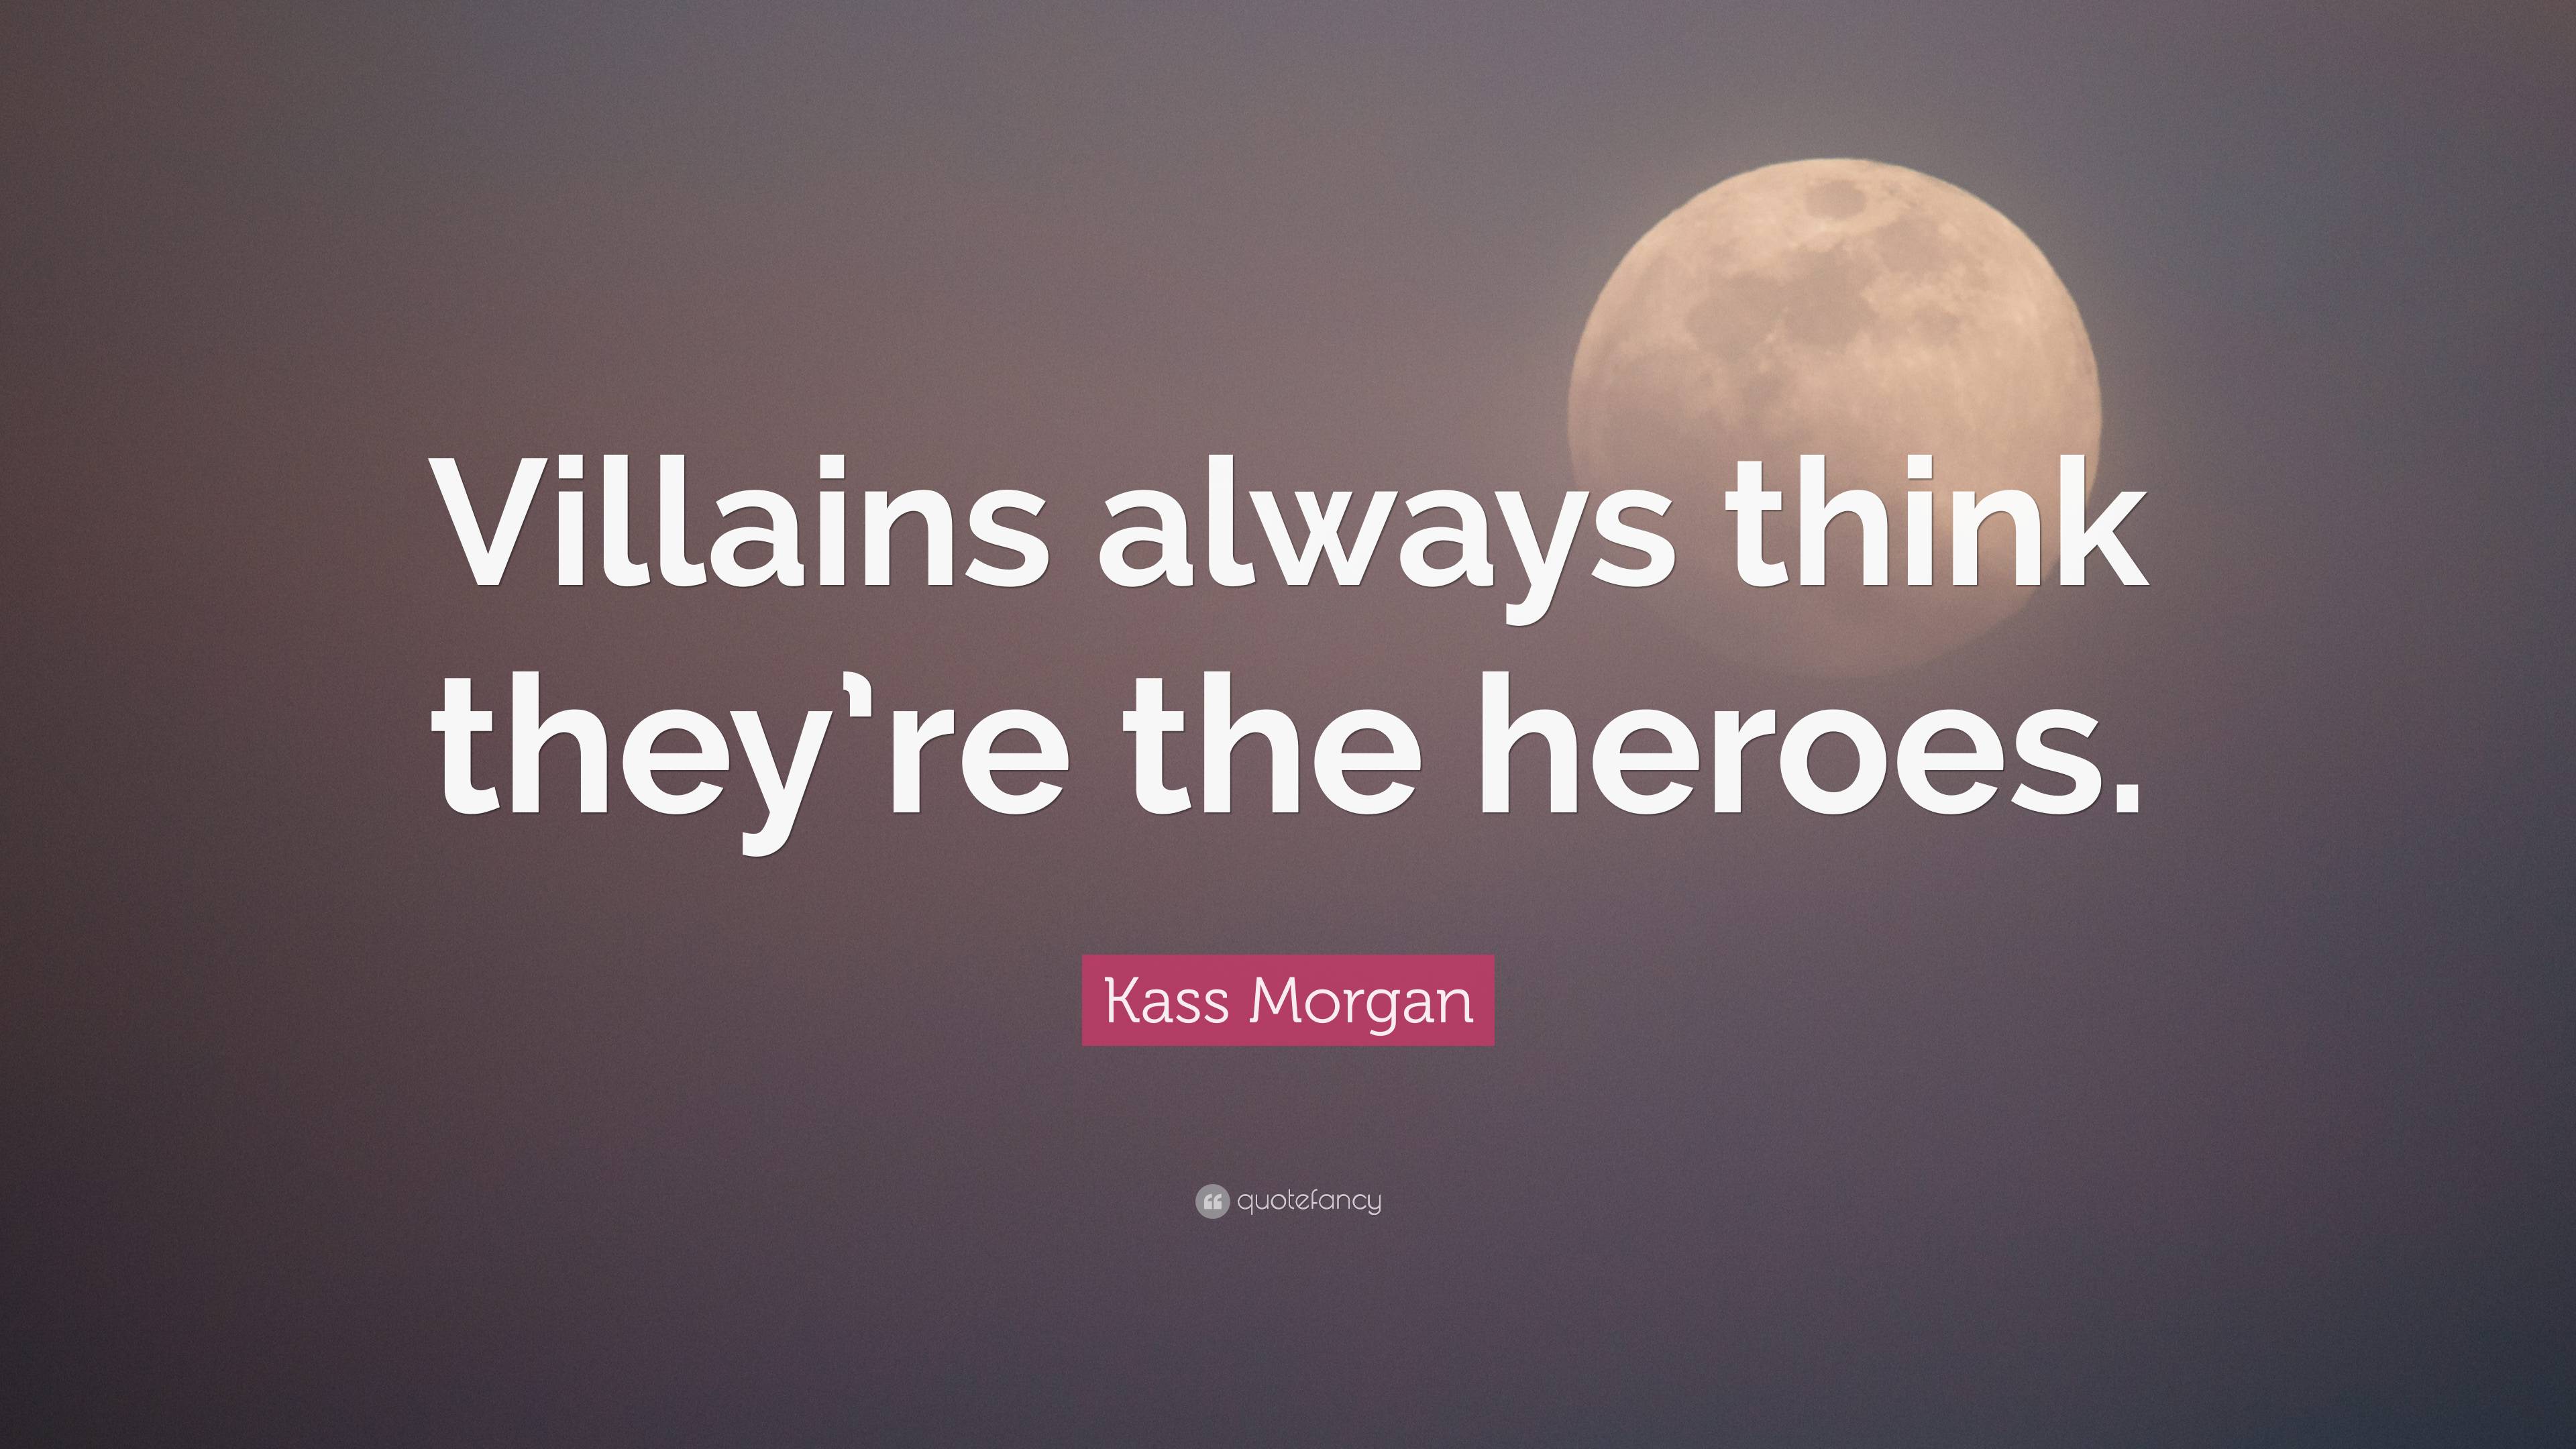 Kass Morgan Quote: “Villains always think they’re the heroes.”